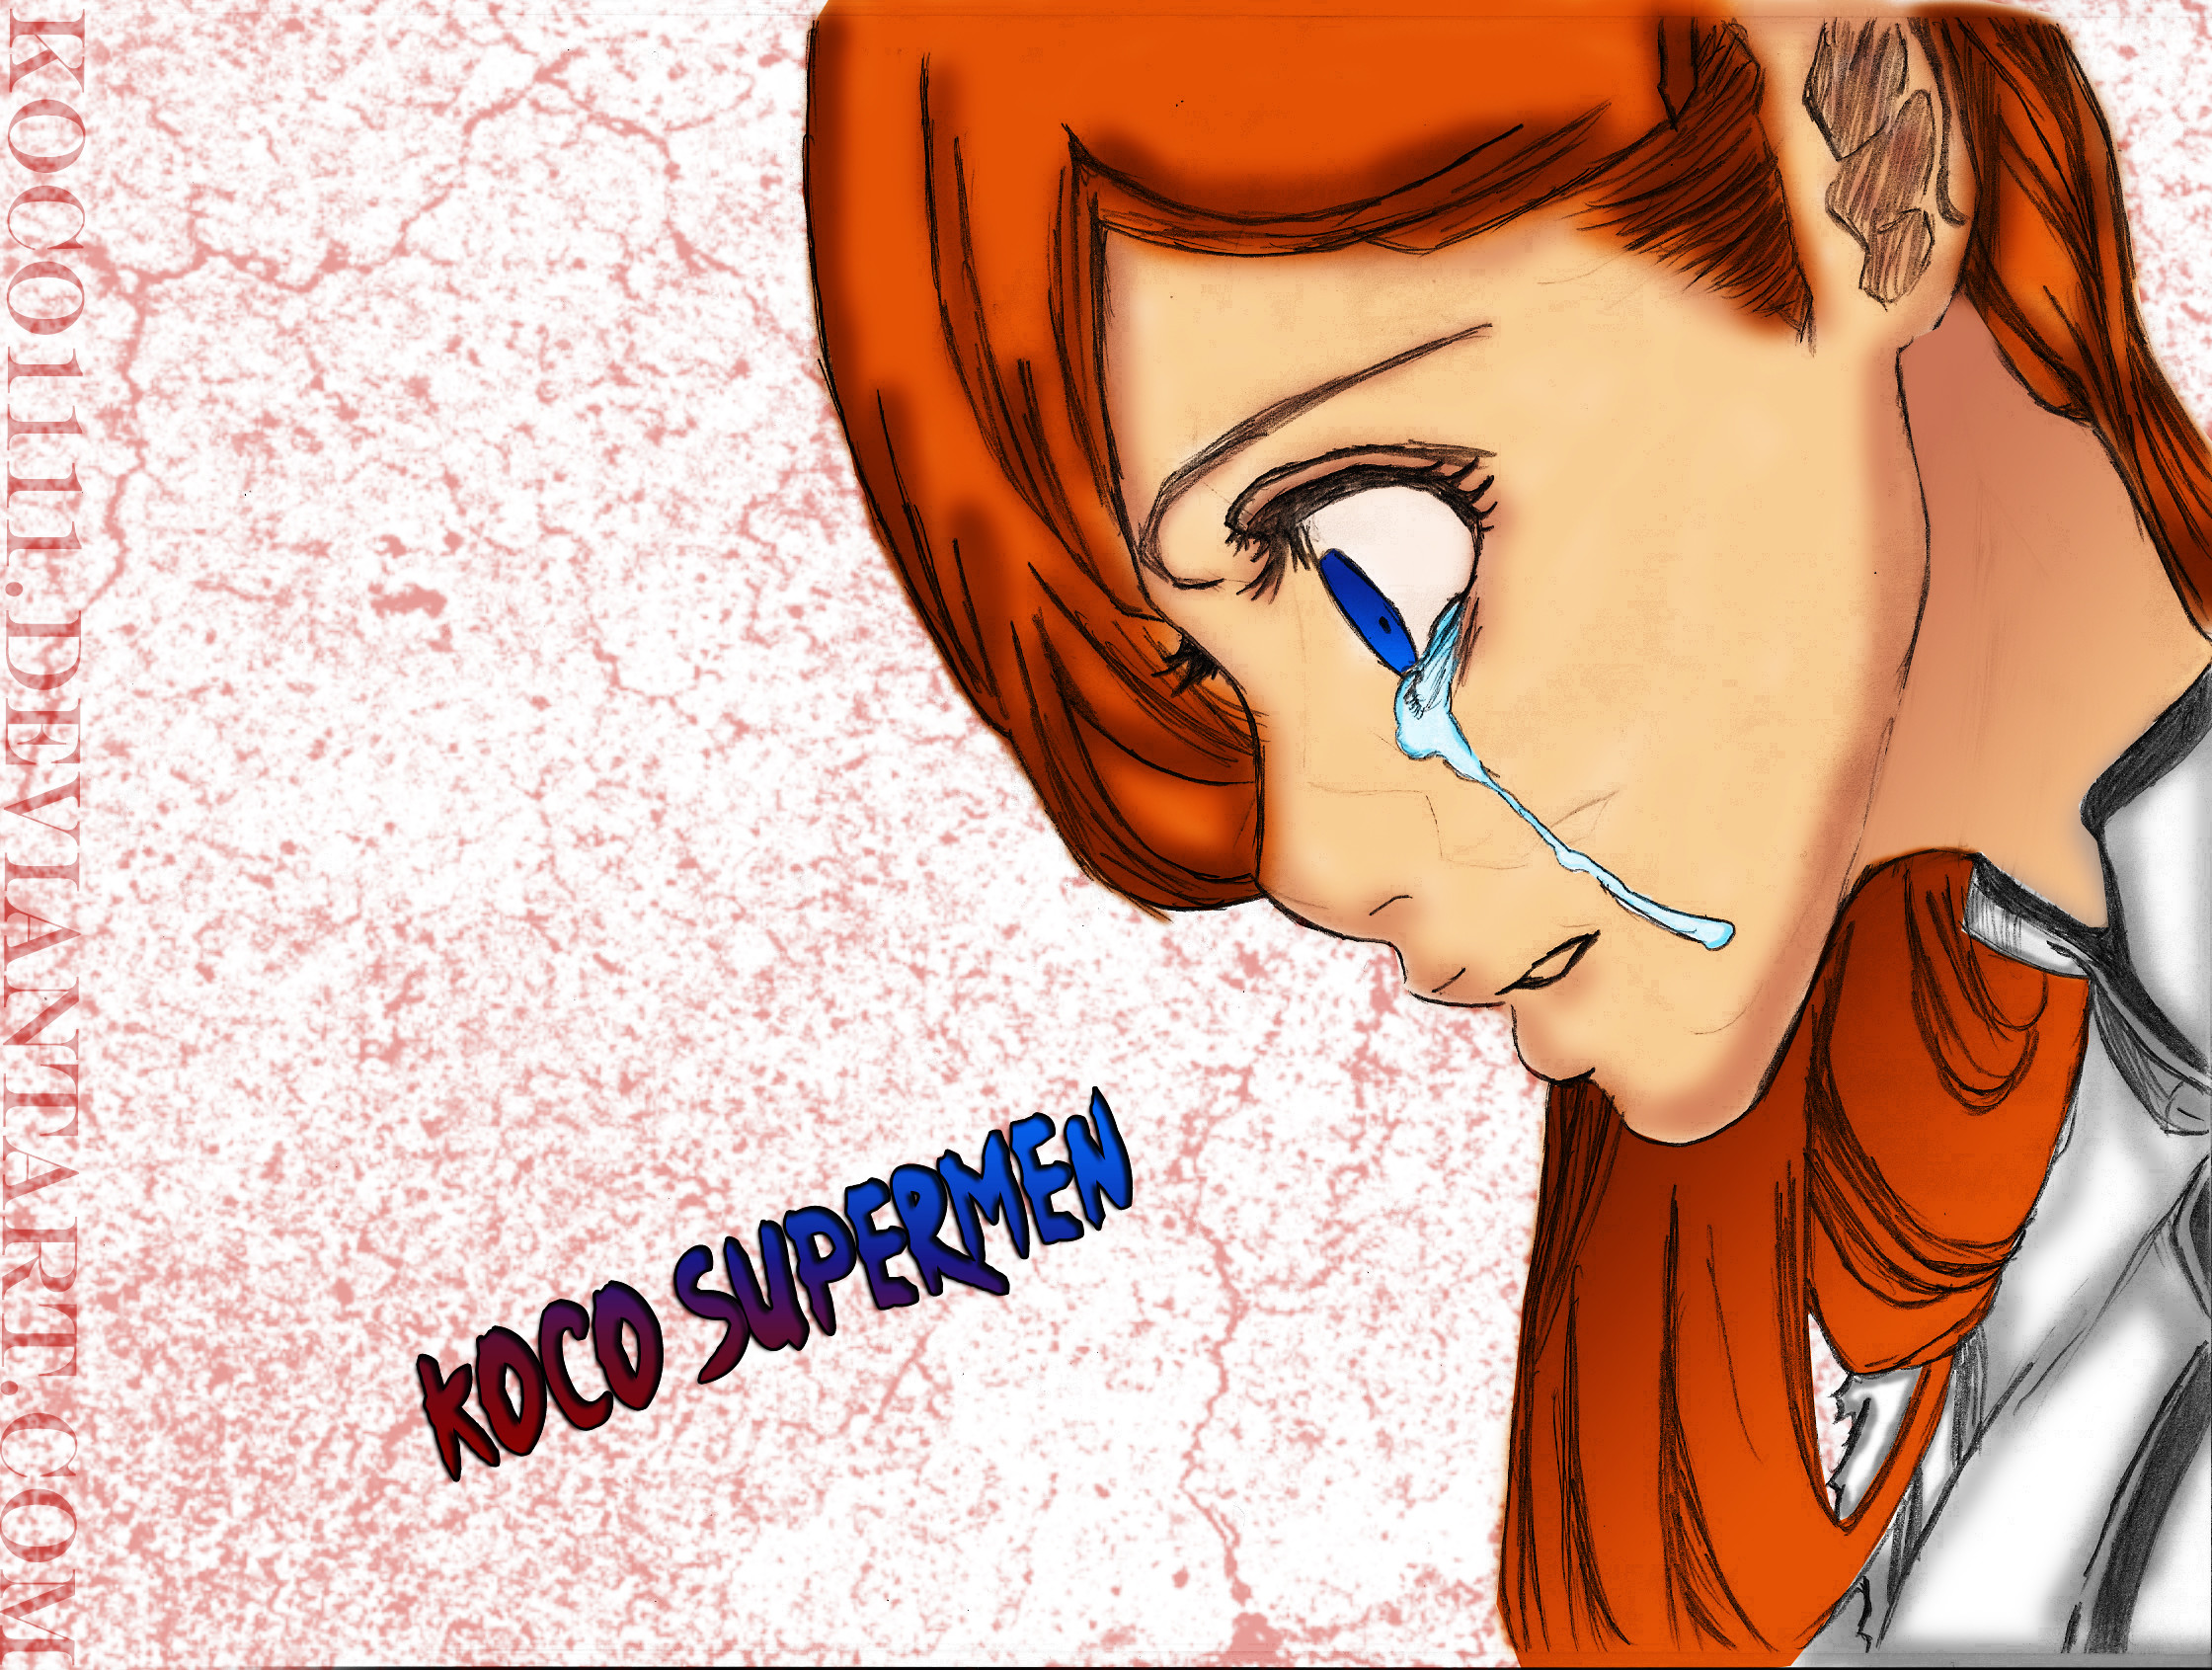 2240x1691 Orihime Inoue crying by koco1111 Orihime Inoue crying by koco1111